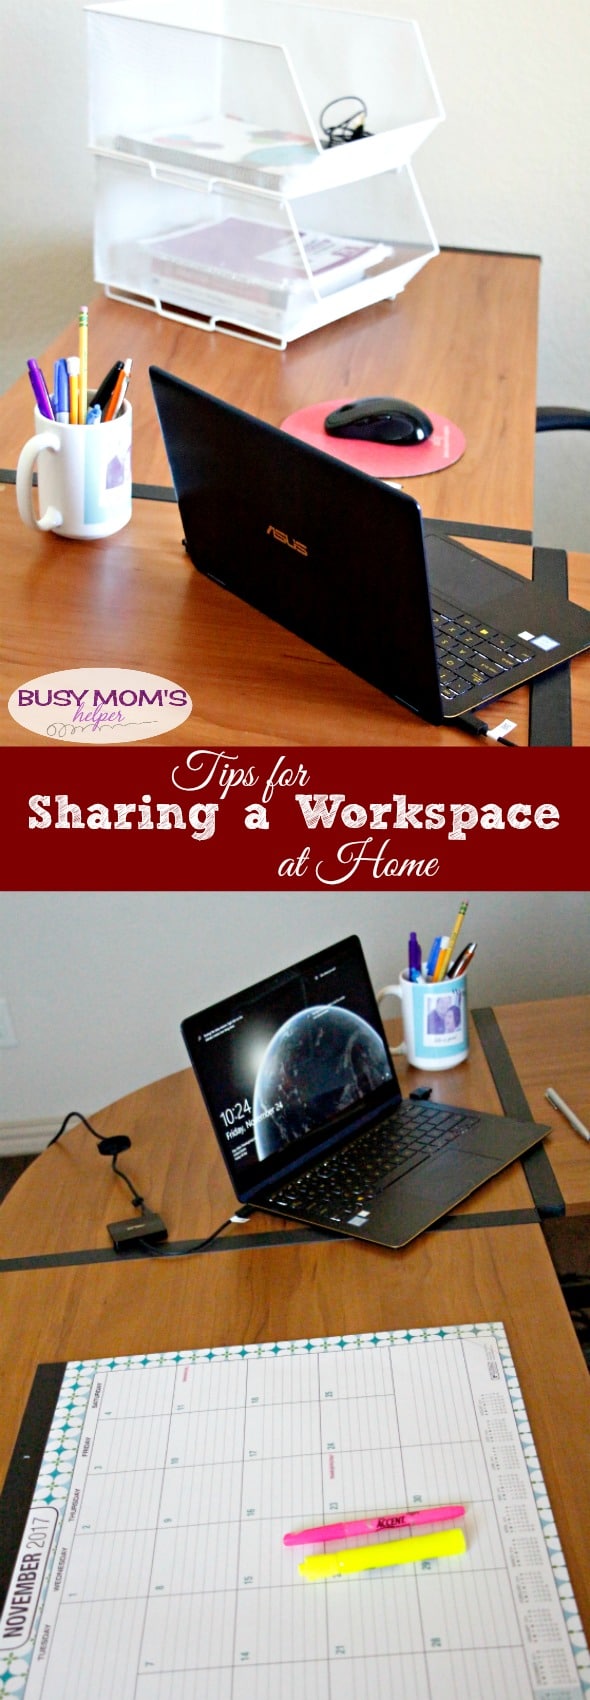 Tips for Sharing a Workspace at Home #AD #LoveYourPC #Intel8thGen